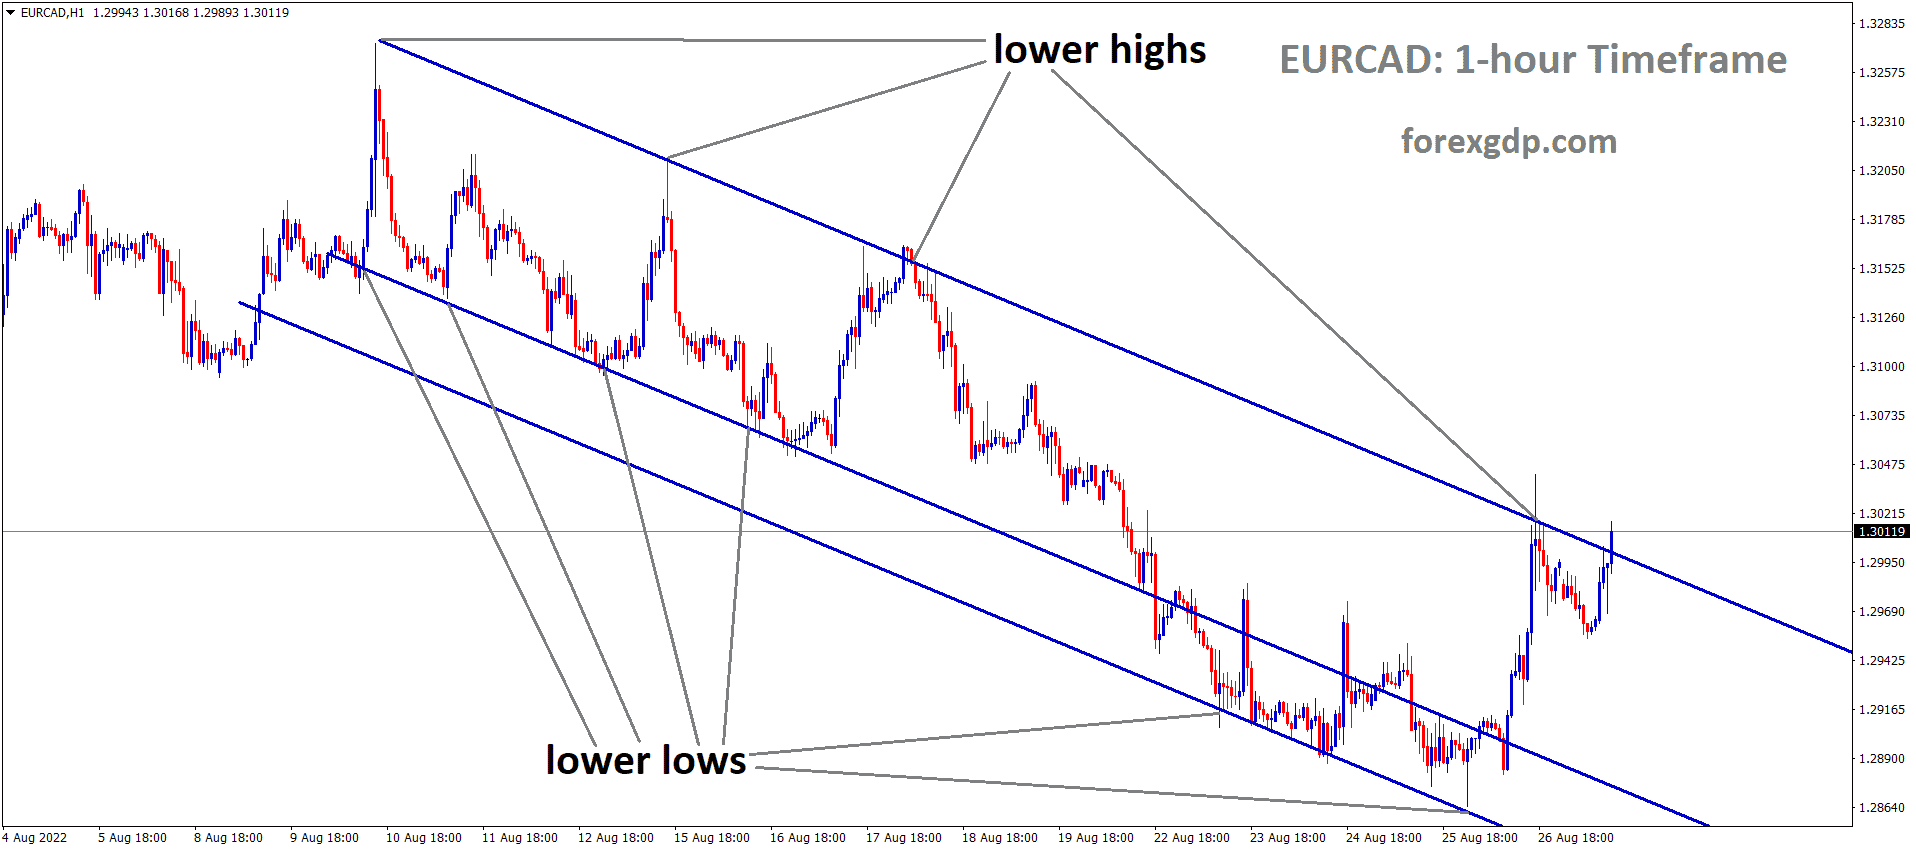 EURCAD is moving in the Descending channel and the Market has reached the Lower high area of the channel